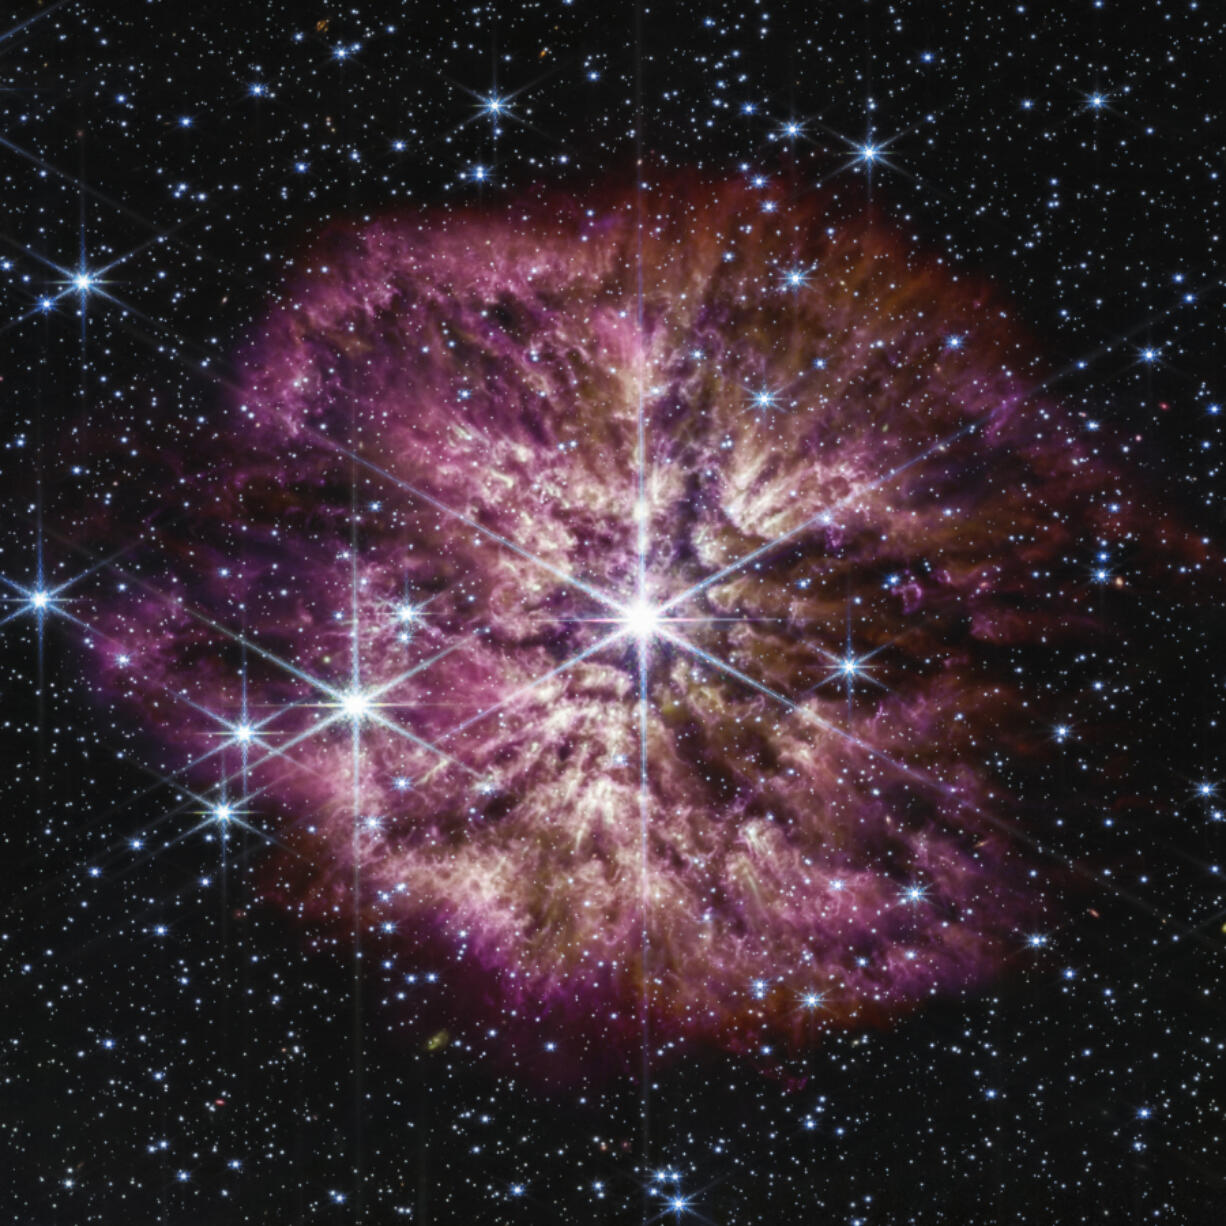 The star Wolf-Rayet 124, center, captured by the James Webb Space Telescope in June. A surrounding nebula is made of material cast off from the aging star in random ejections, and from dust produced in the ensuing turbulence. The telescope captured the rare and fleeting phase of the star on the cusp of death.